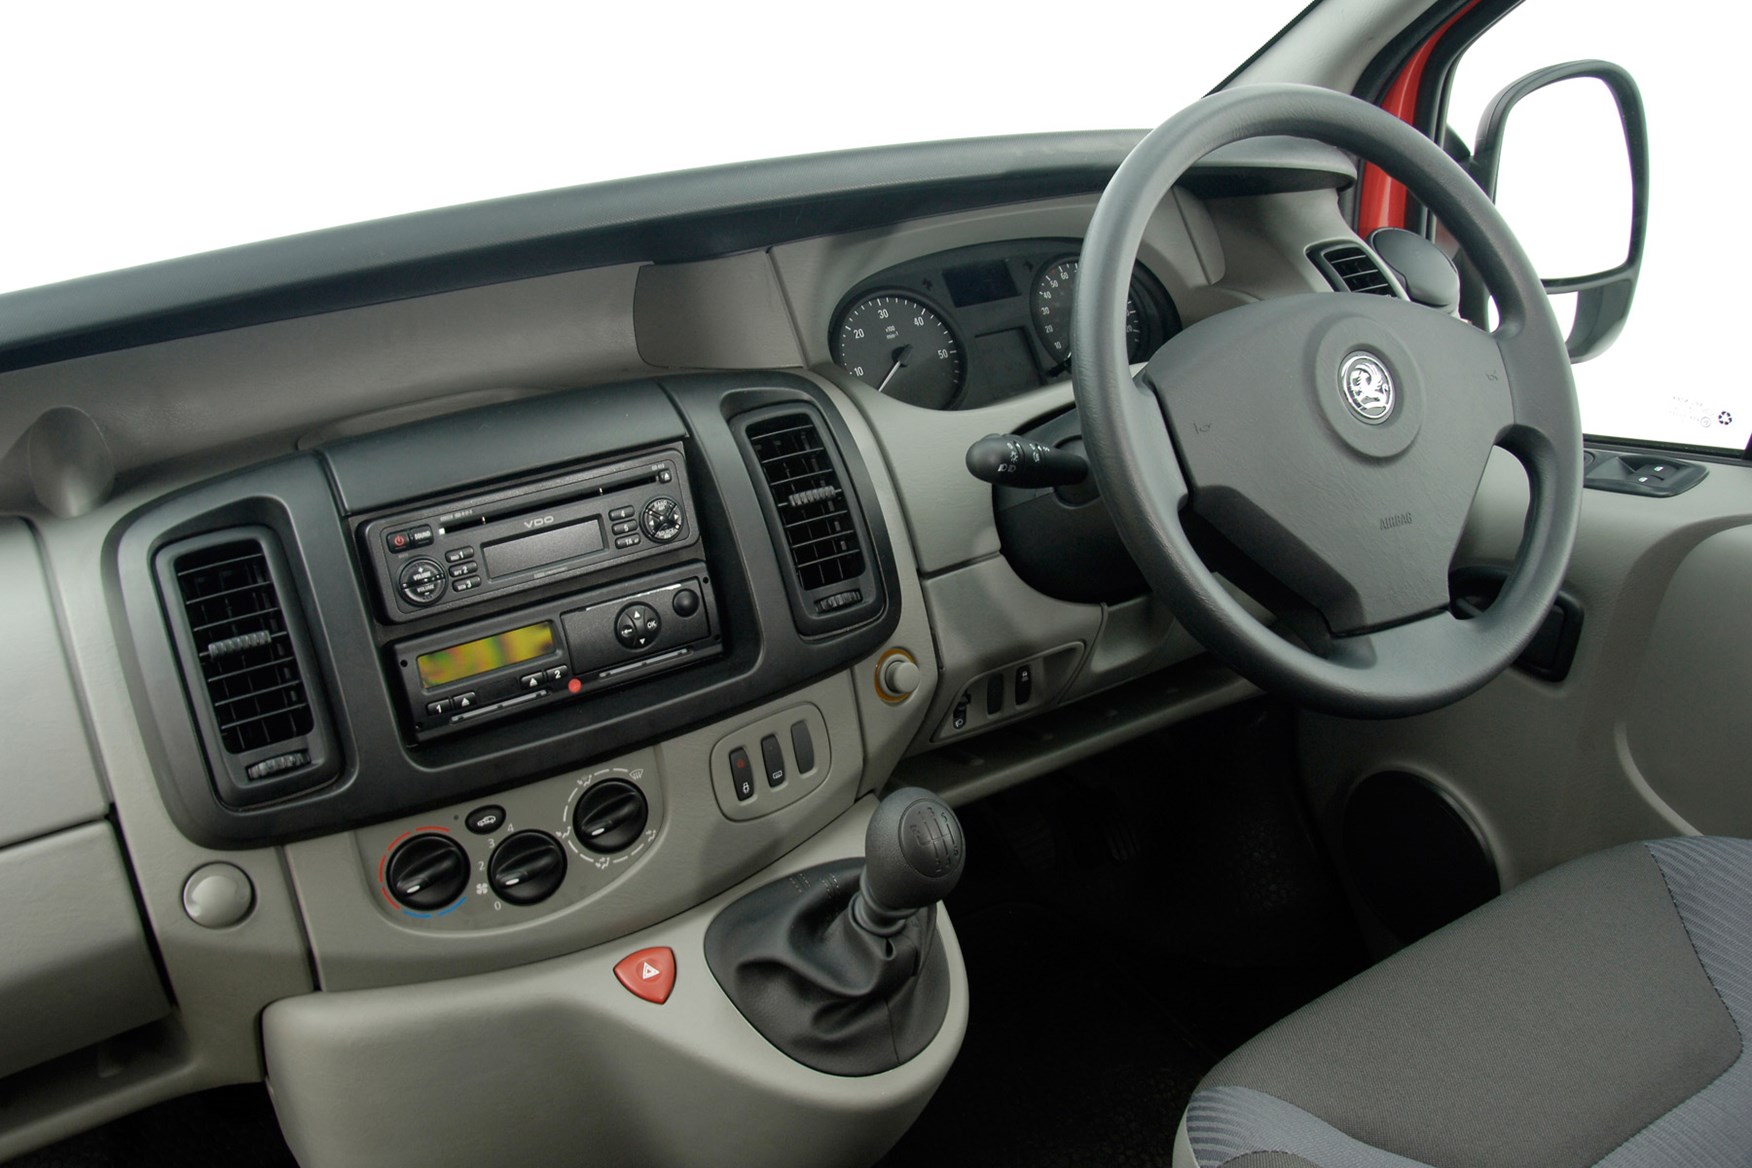 Vauxhall Vivaro review on Parkers Vans - in the cabin